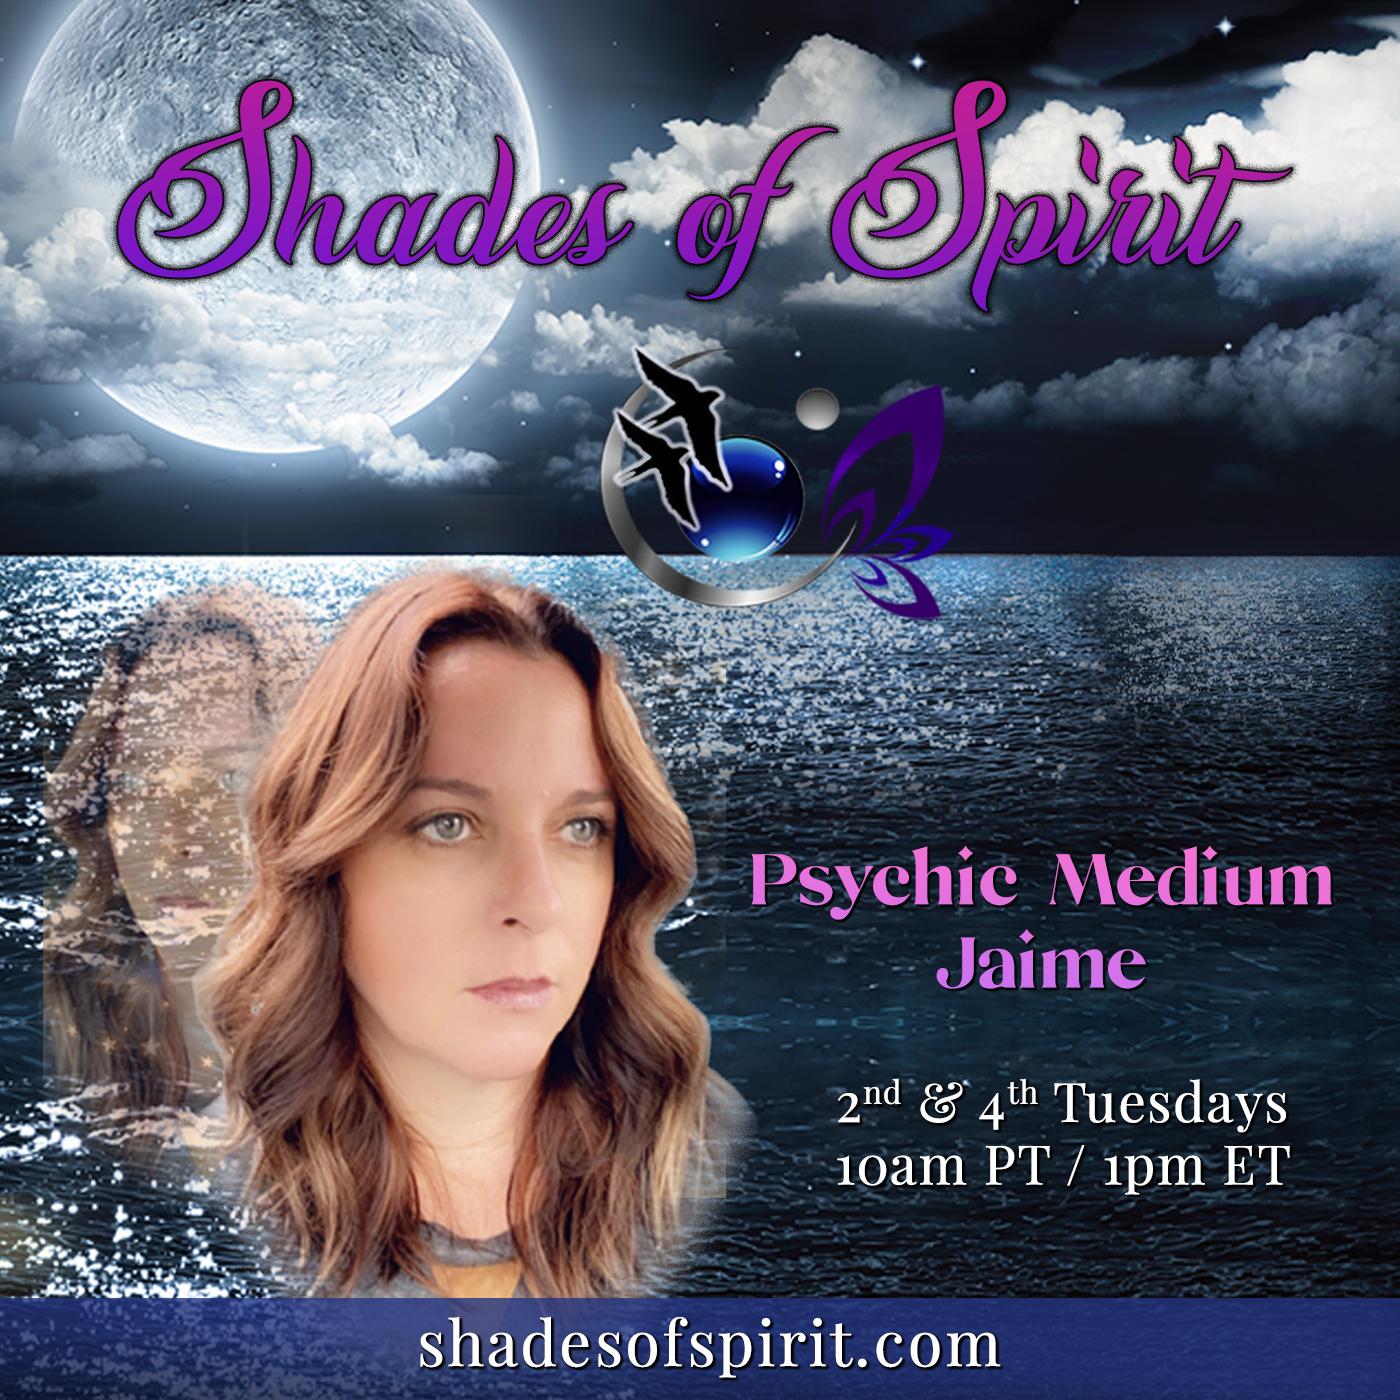 Shades of Spirit: Making Sacred Connections Bringing A Shade Of Spirit To You with Psychic Medium Jaime and ”Spiritwalker” Nicole